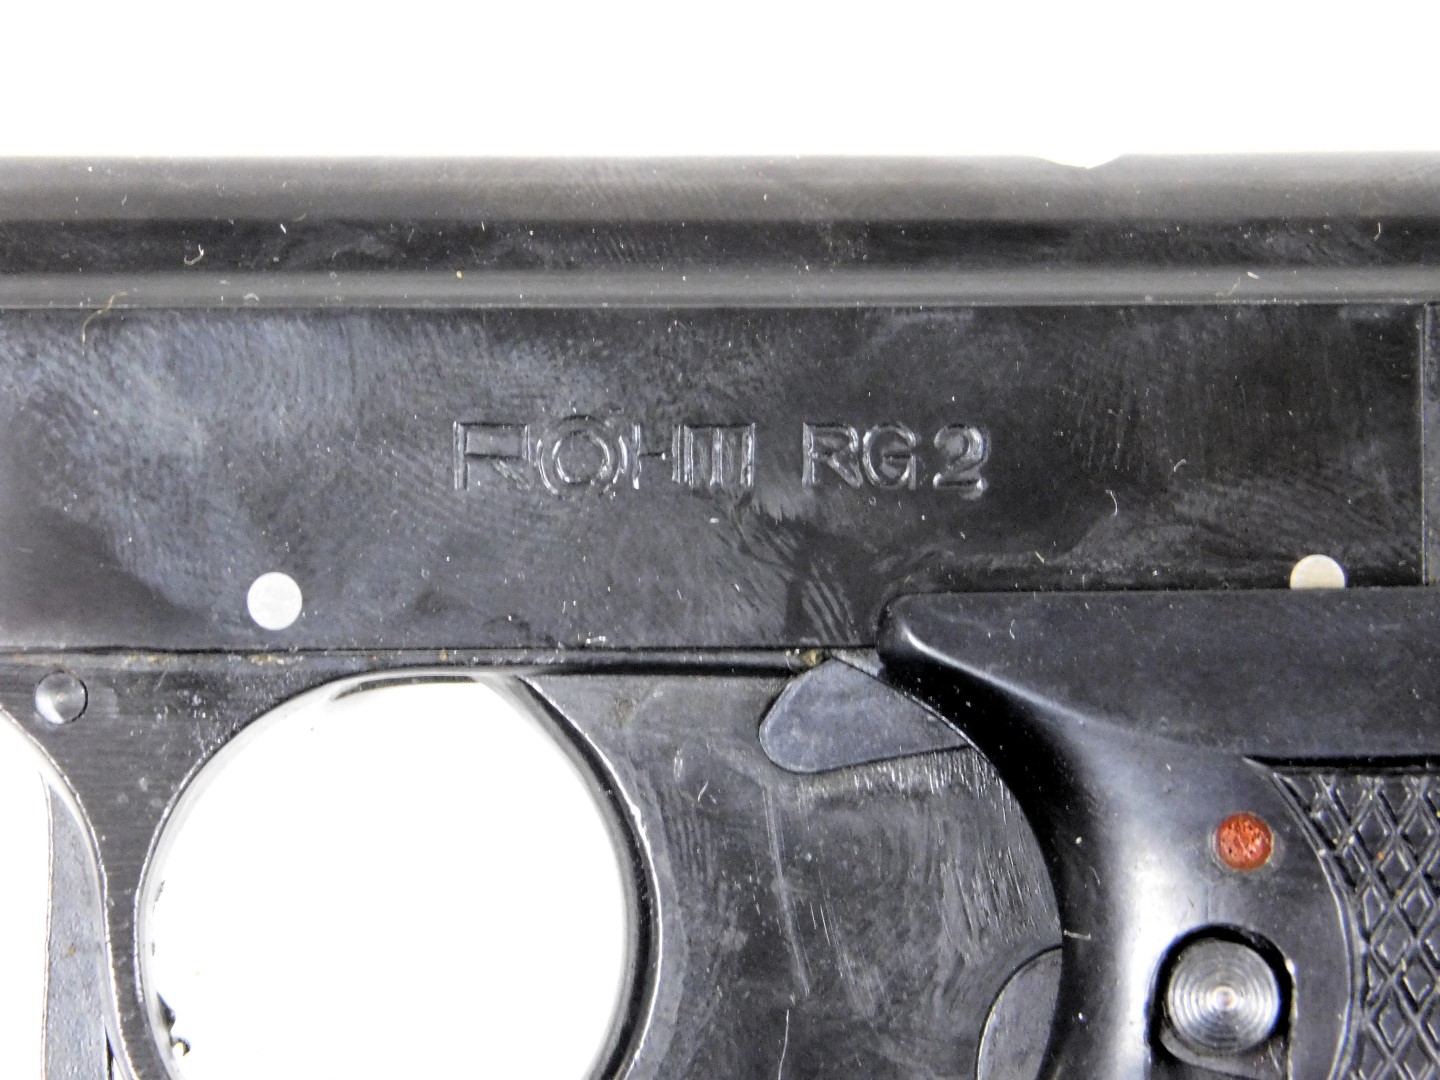 A Rohm sporting starting pistol RG2, boxed with instructions. - Image 3 of 5